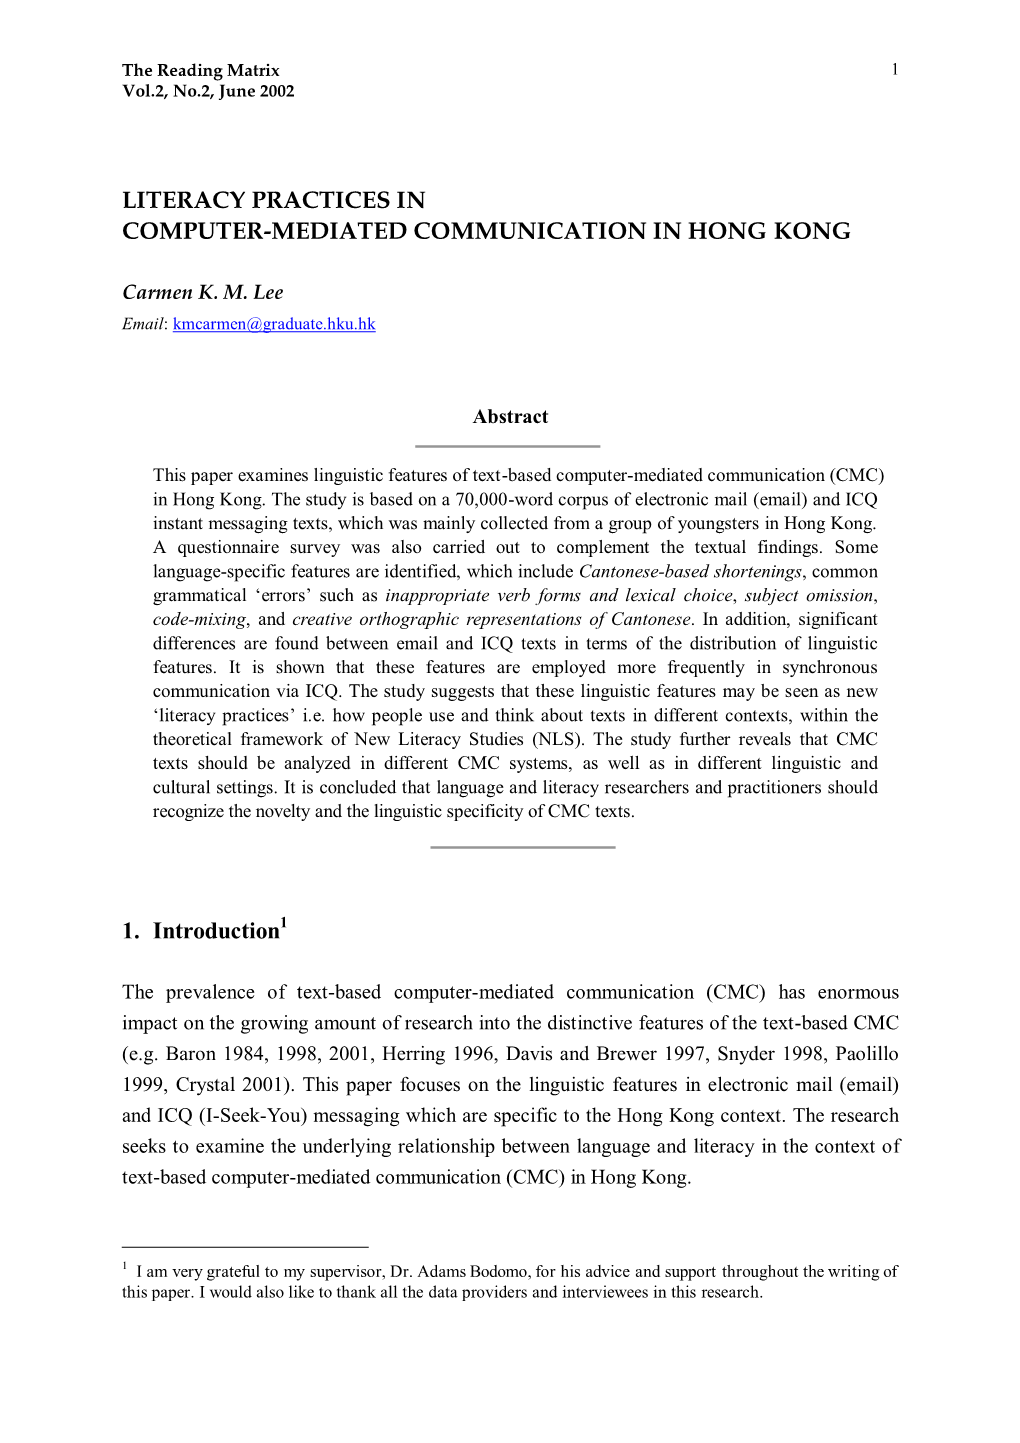 Literacy Practices in Computer-Mediated Communication in Hong Kong